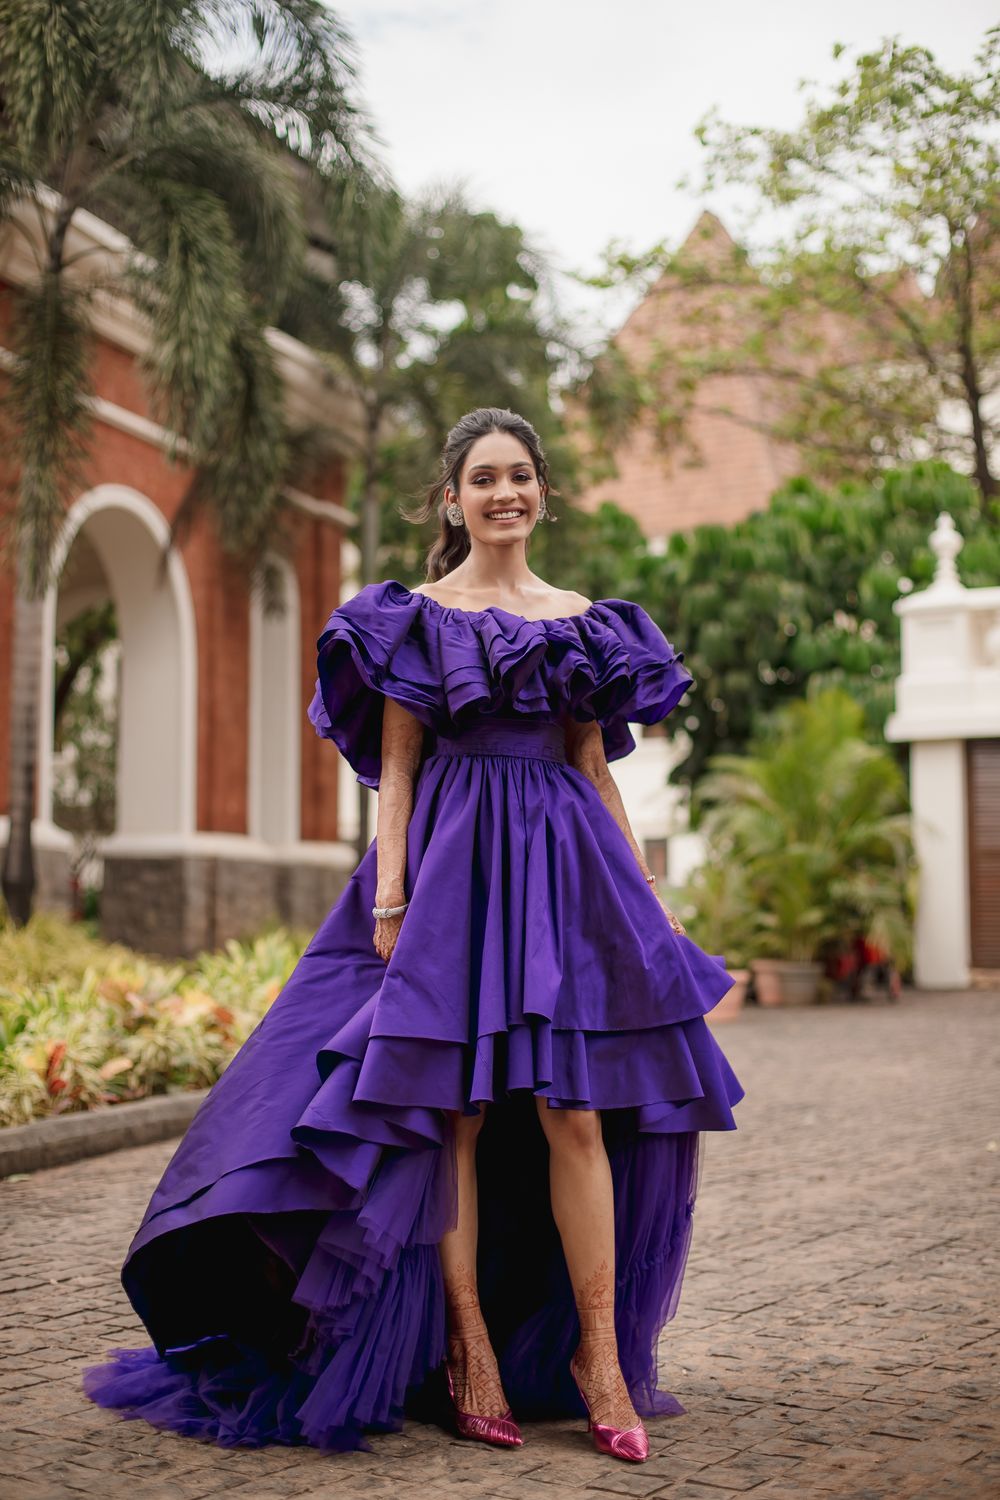 Photo of Bride posing in a vibrant purple dress for her day event by the beach - Carnival